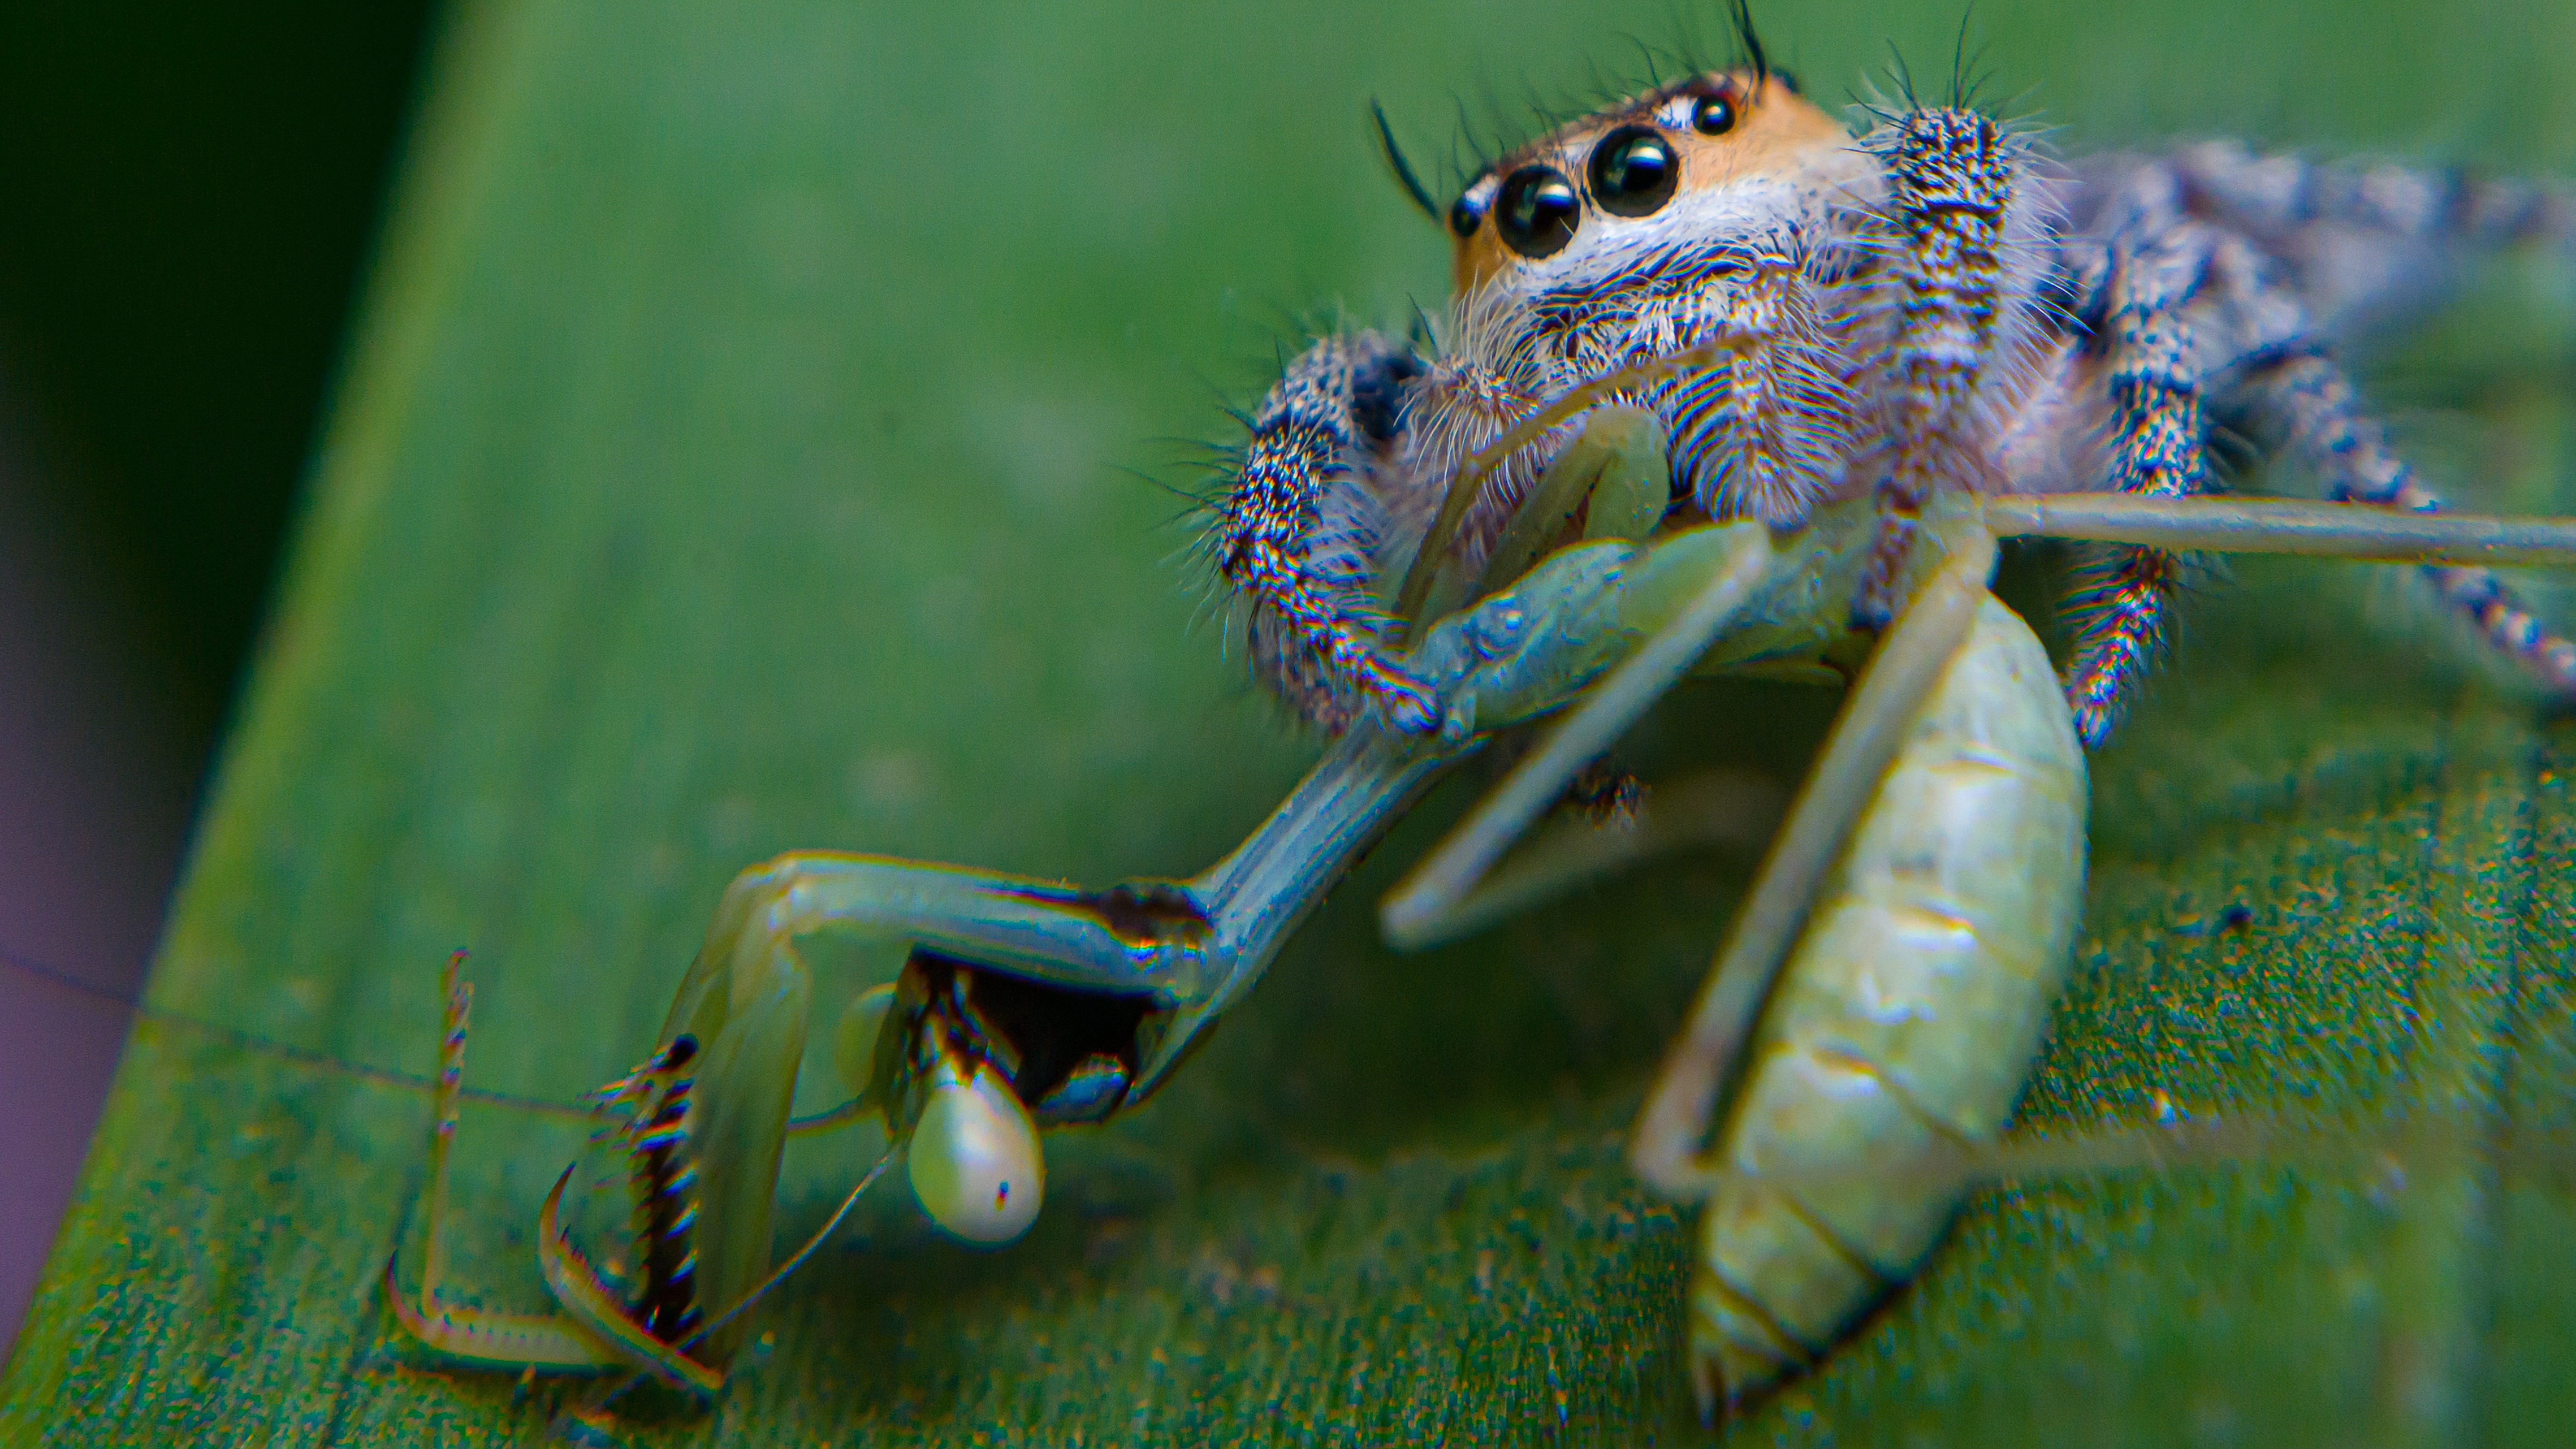 A jumping spider with a kill